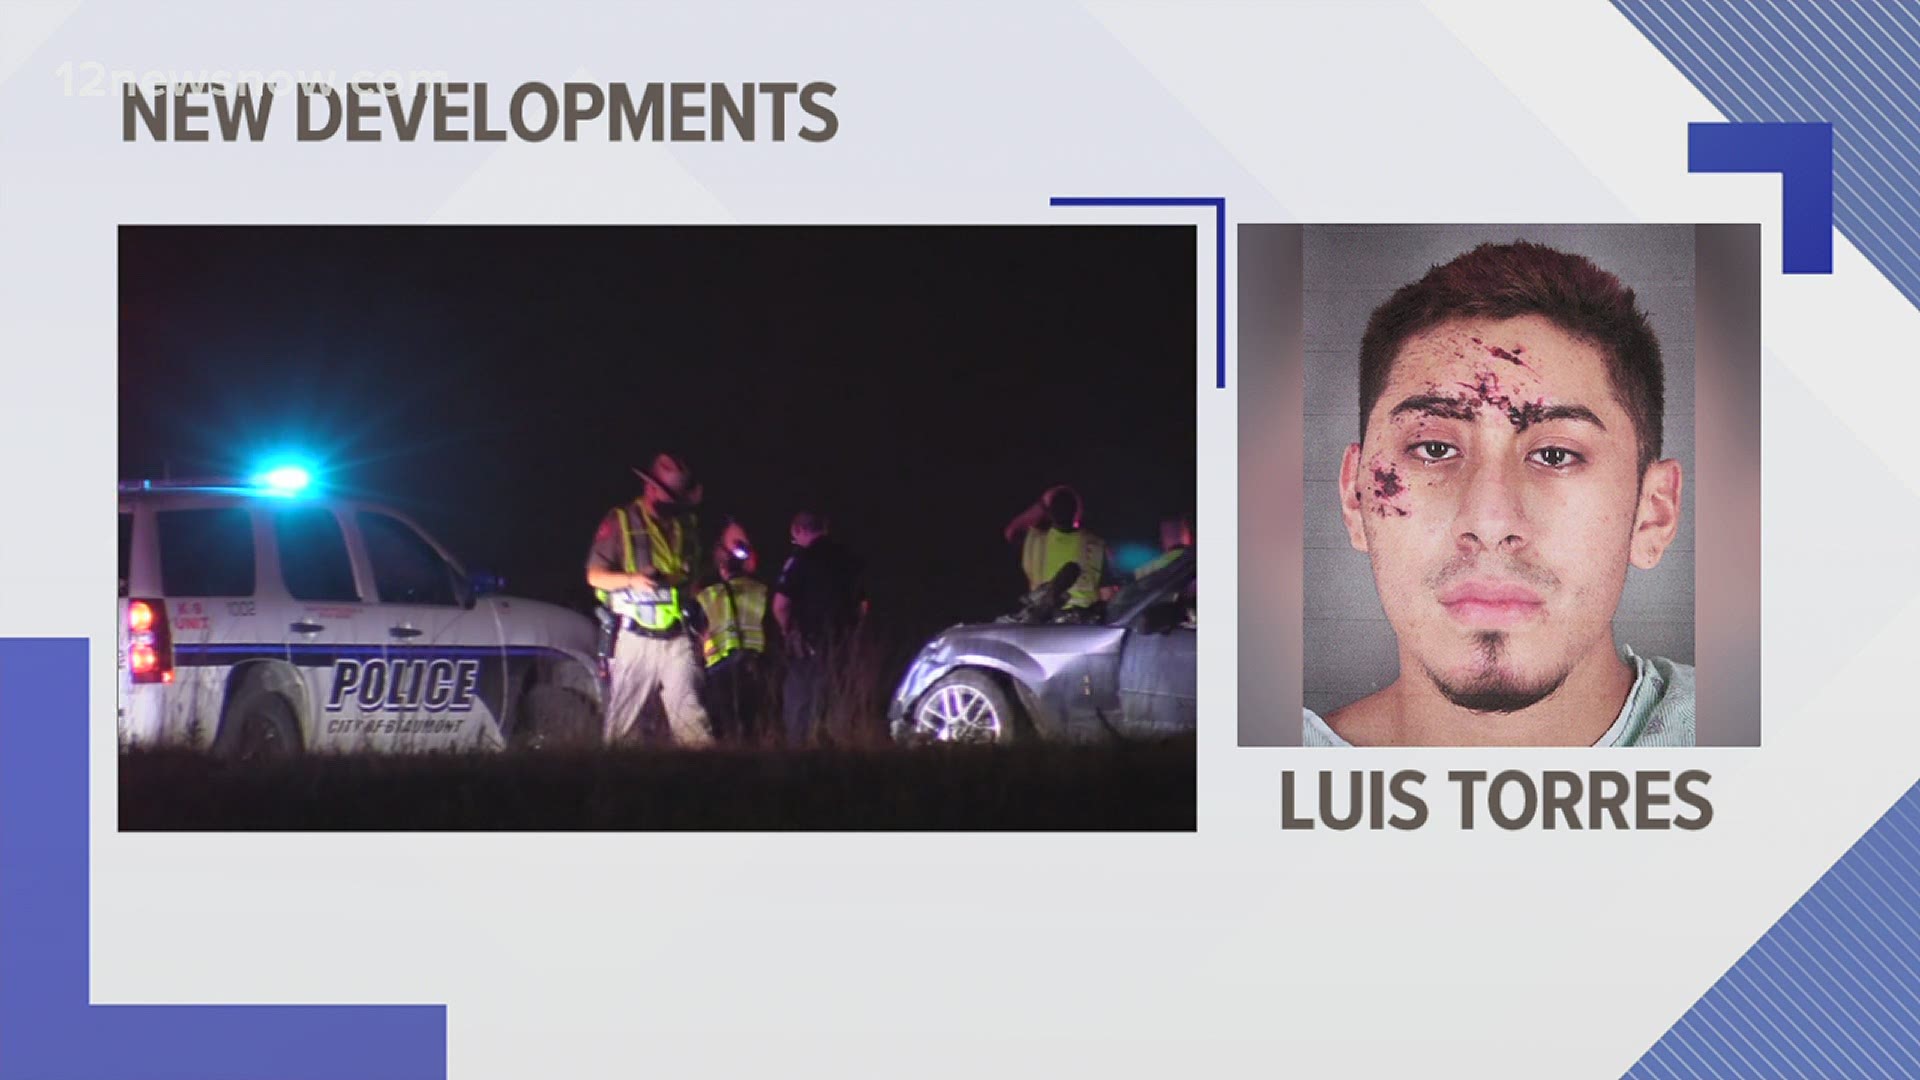 Luis Torres has been indicted on two first degree felony charges